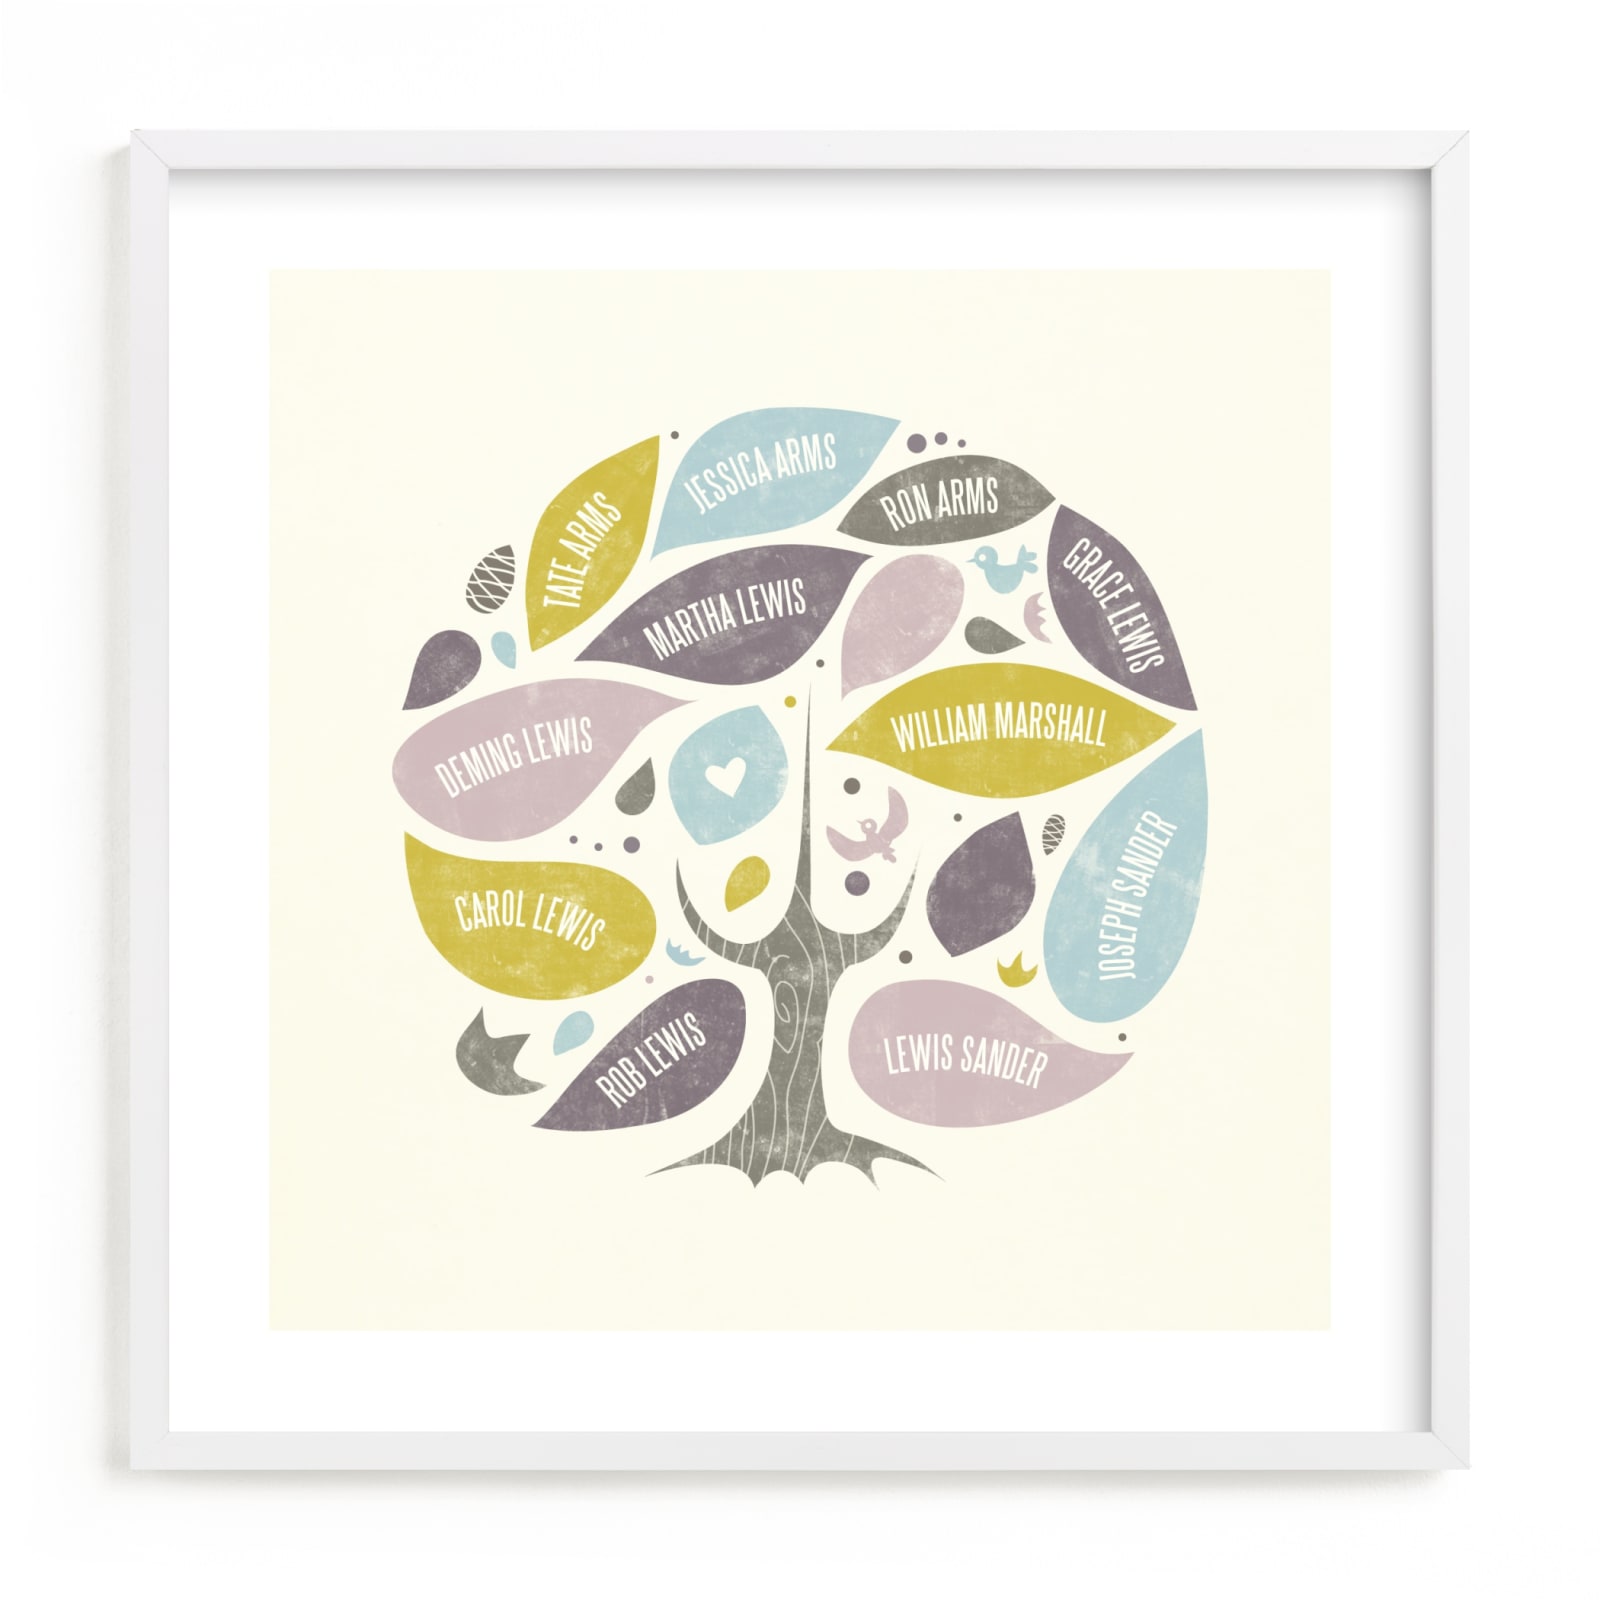 This is a purple family tree art by Heather Francisco called Folk Family Tree.